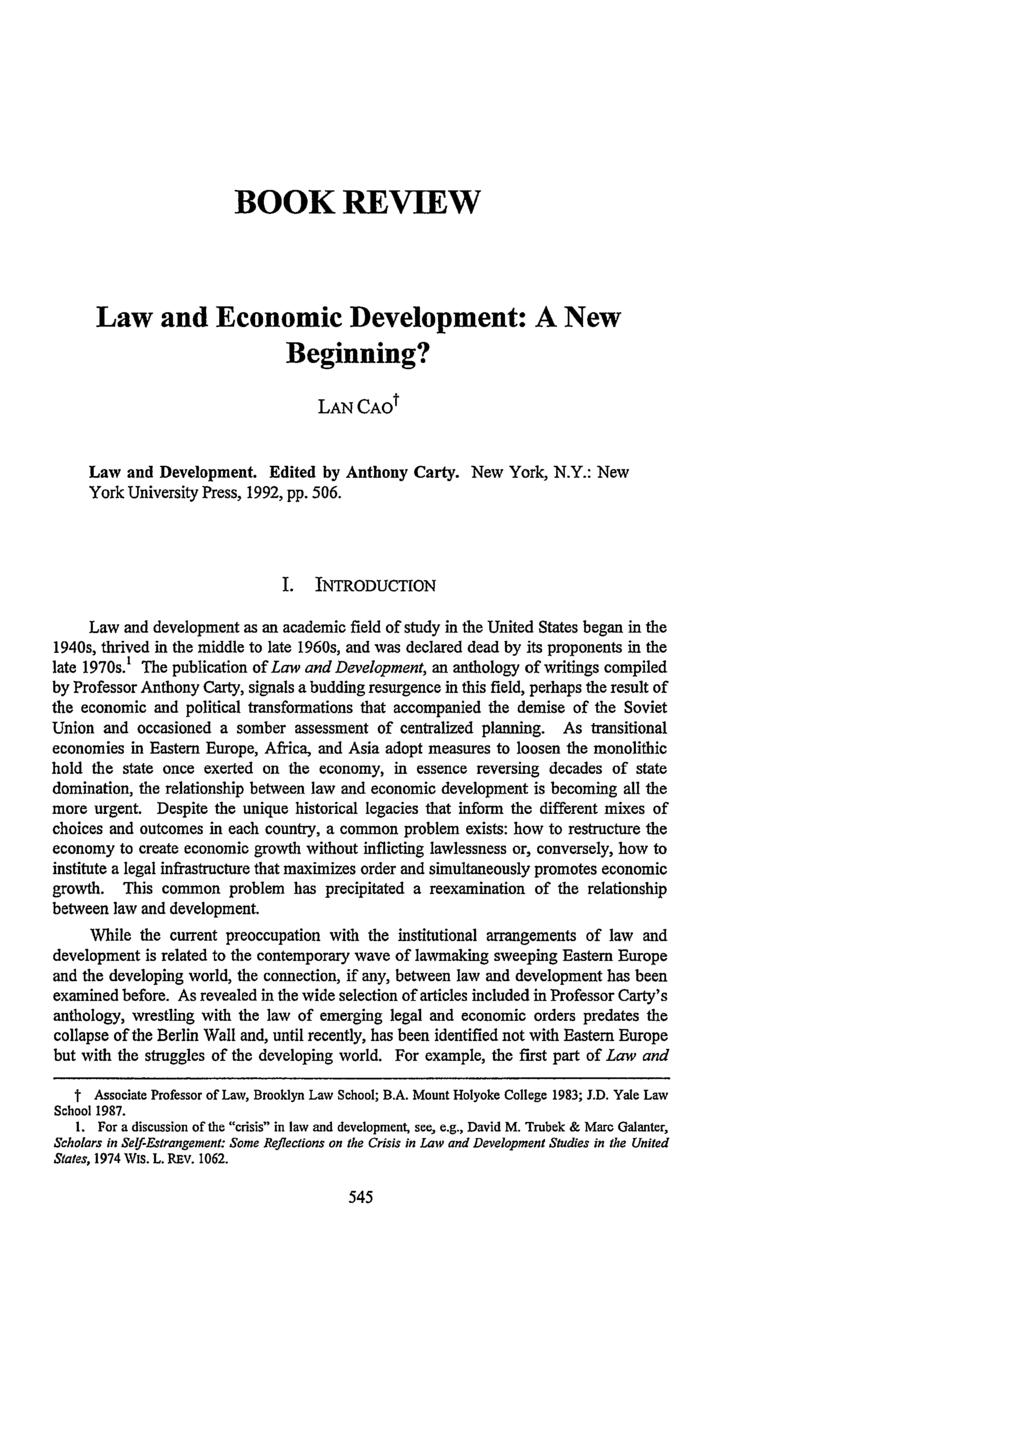 BOOK REVIEW Law and Economic Development: A New Beginning? LANCAOt Law and Development. Edited by Anthony Carty. New York, N.Y.: New York University Press, 1992, pp. 506. I.